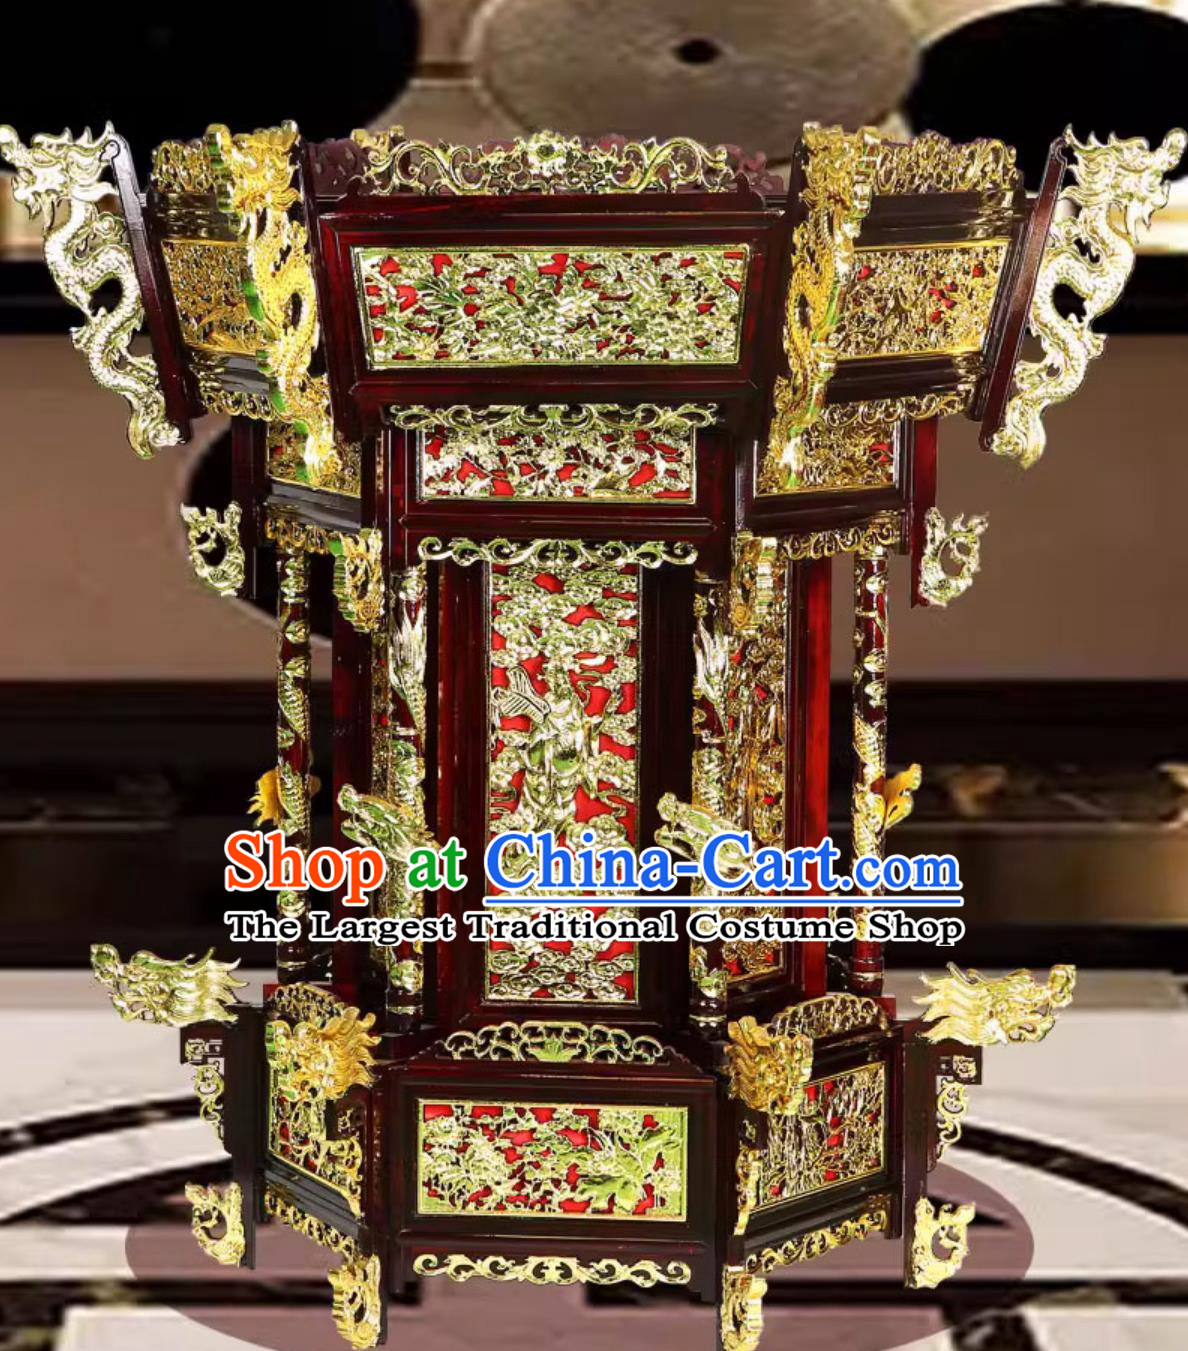 150cm Solid Wood Carved Large Faucet Gilded Temple Glazed Lantern Antique Palace Lantern Chinese Classical Large Lantern